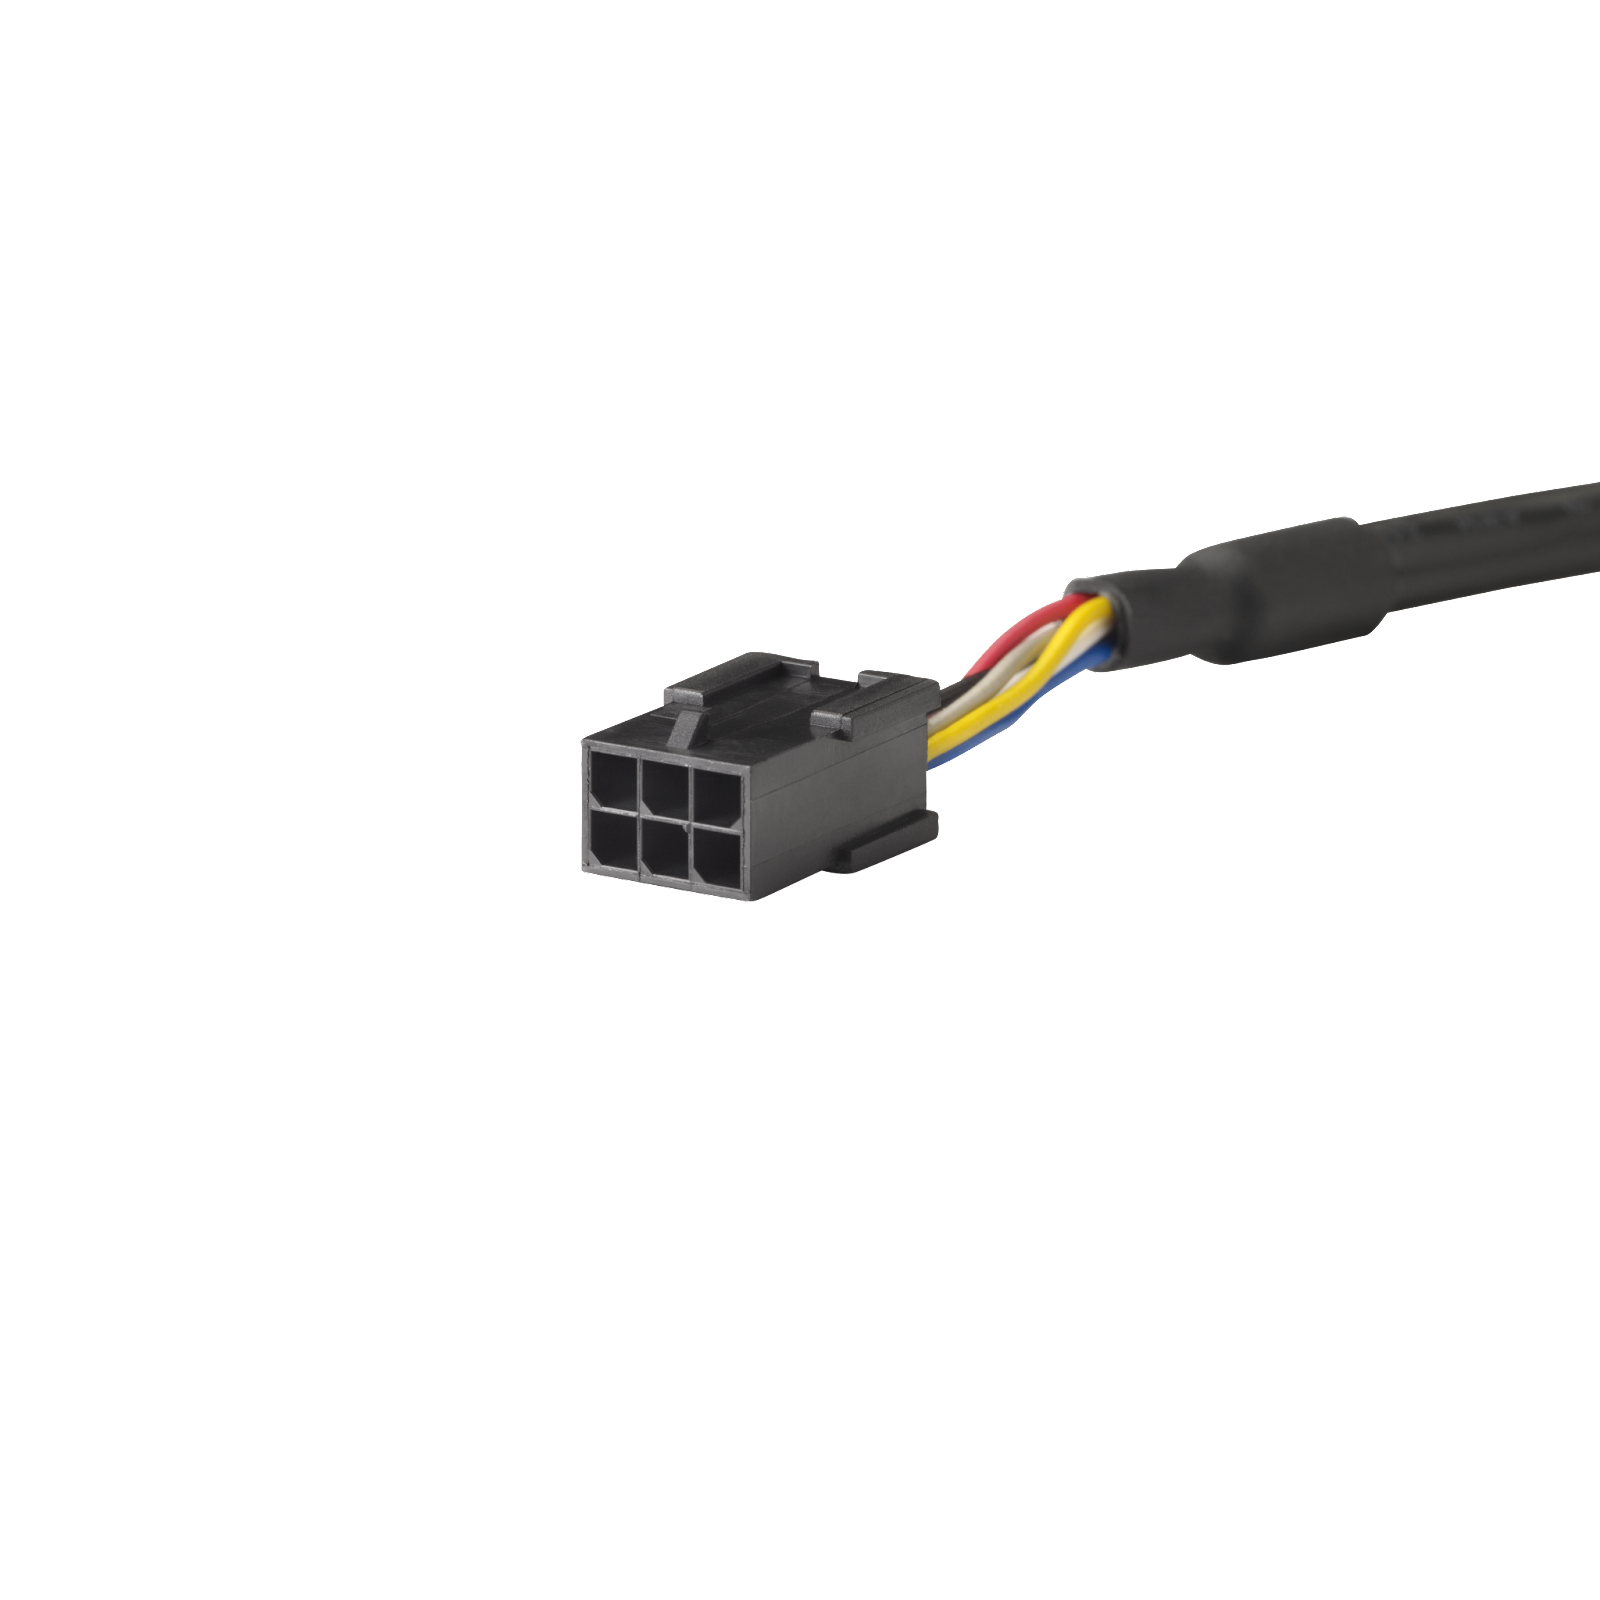 Image of connector